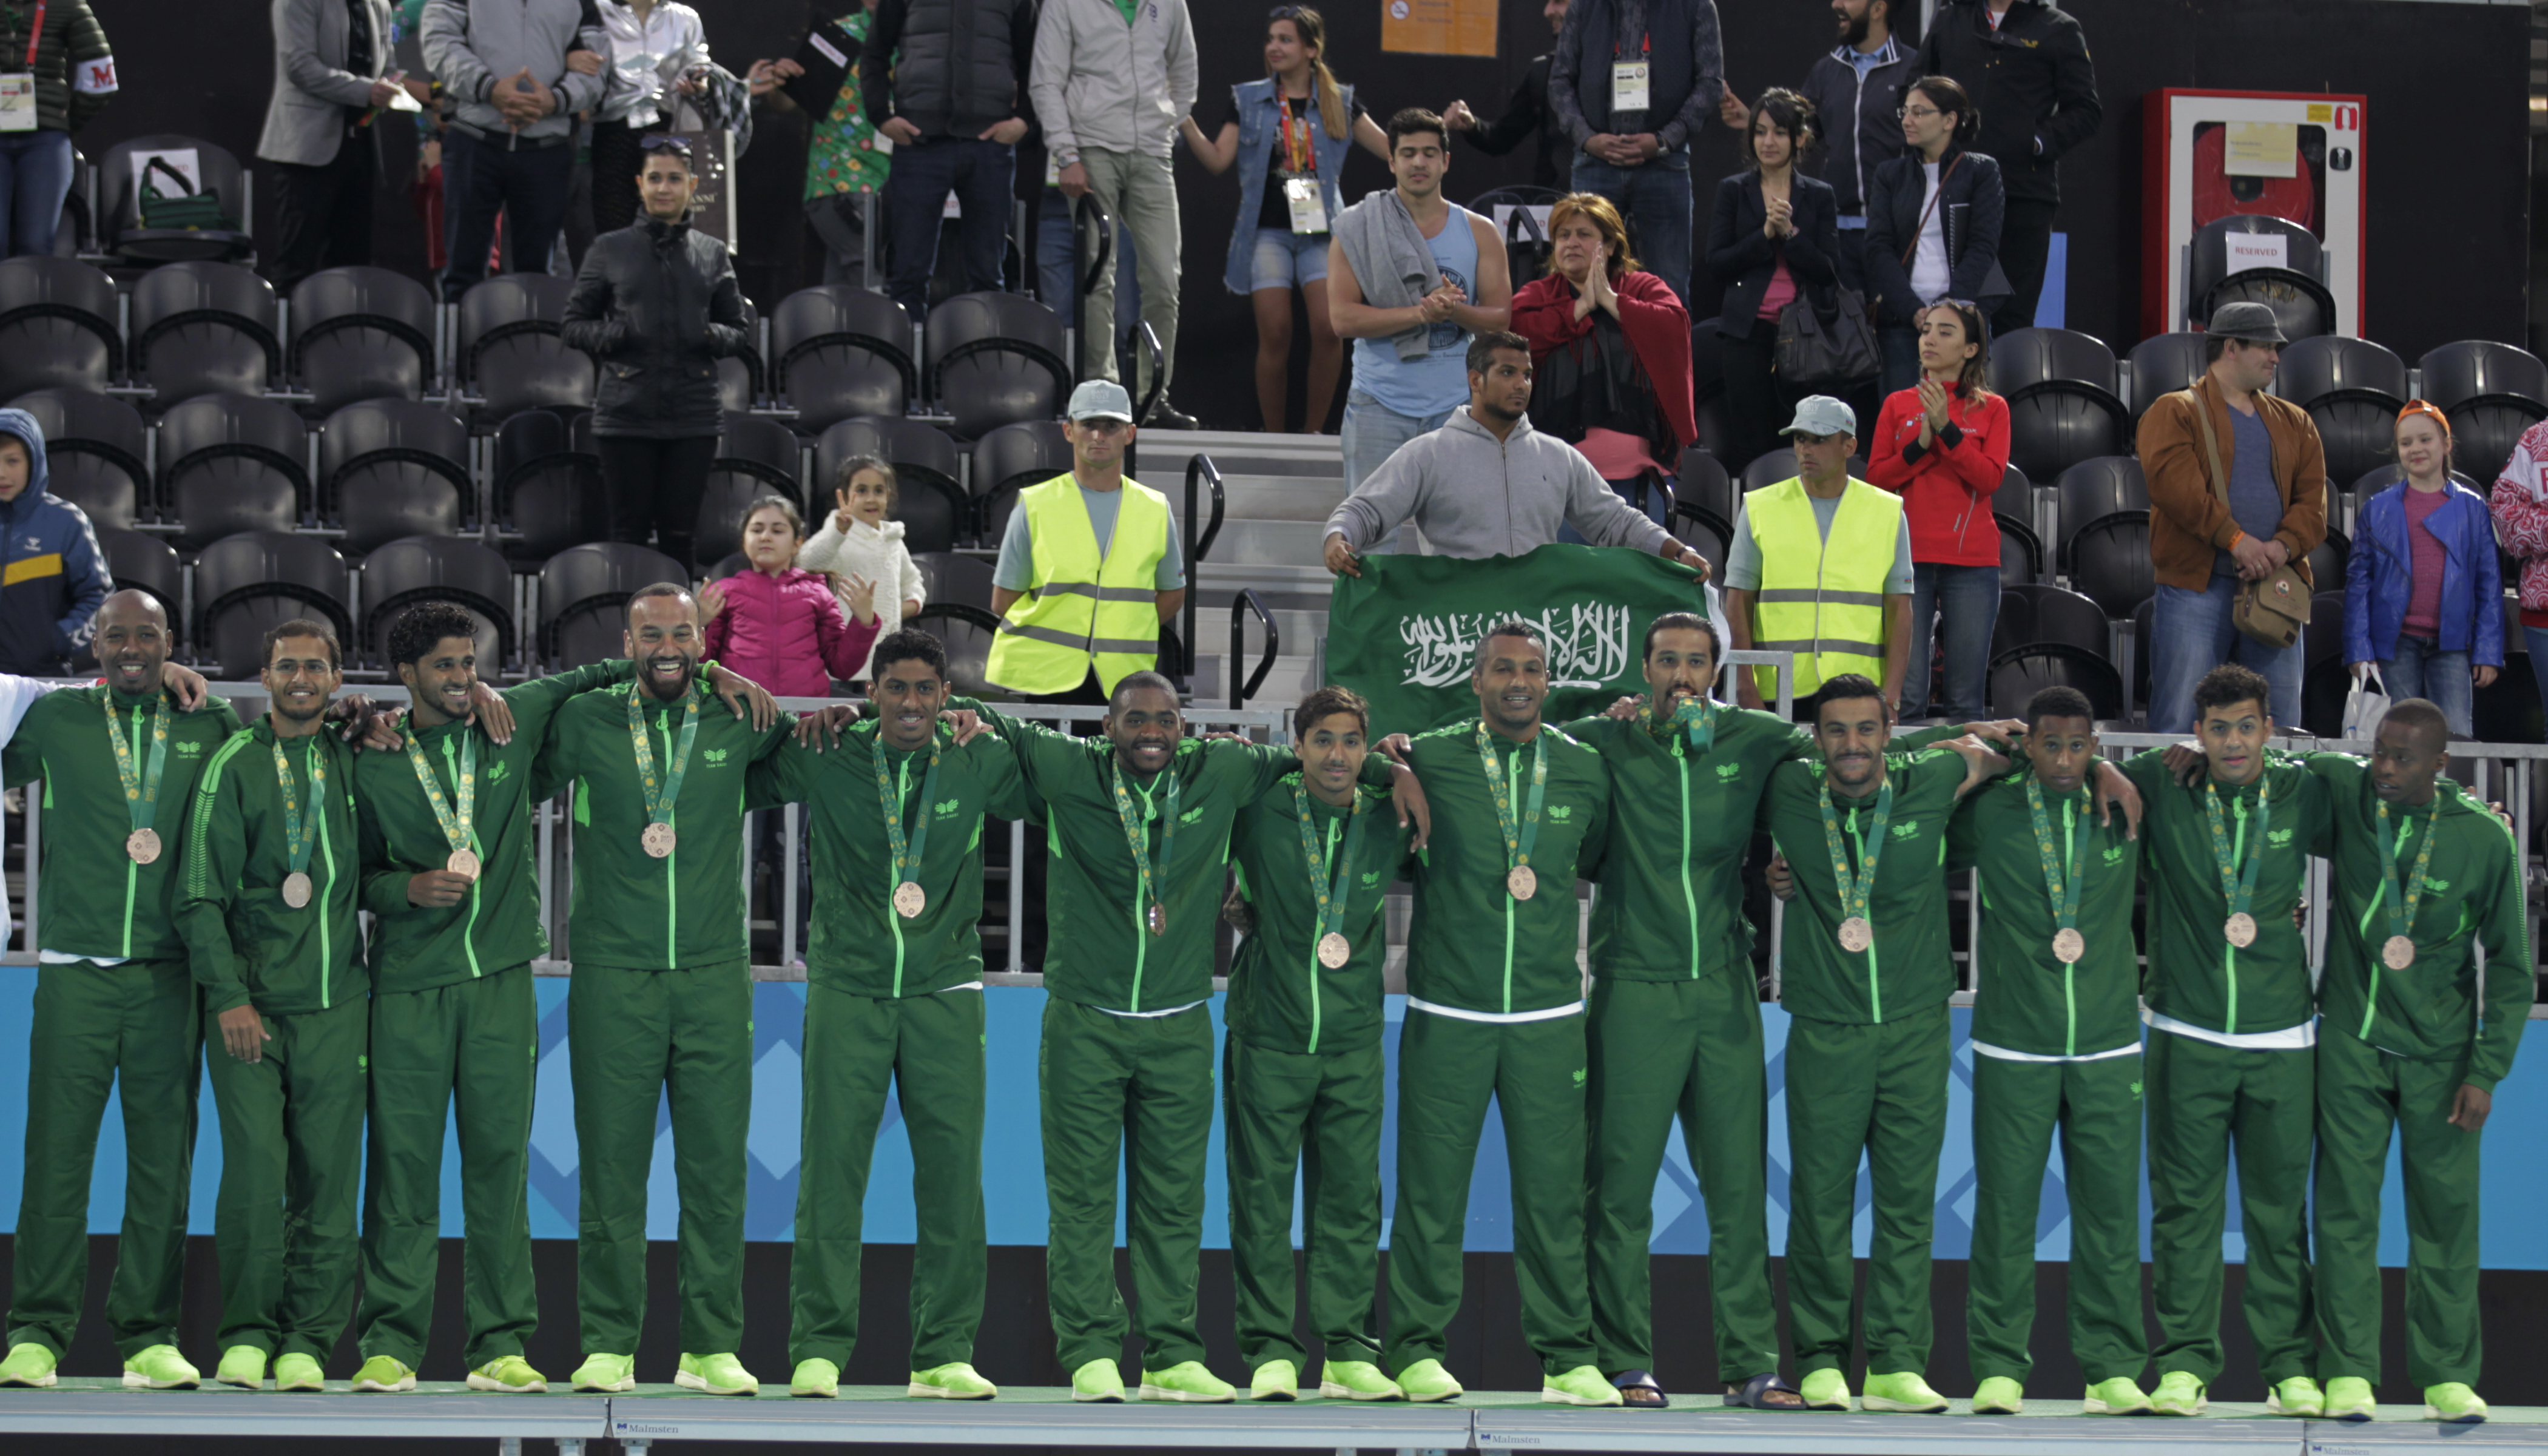  Medal Ceremony of the winner teams of the“Water Polo (Male) Event” During the 4th Olympic Solidarity Games, Baku 2017